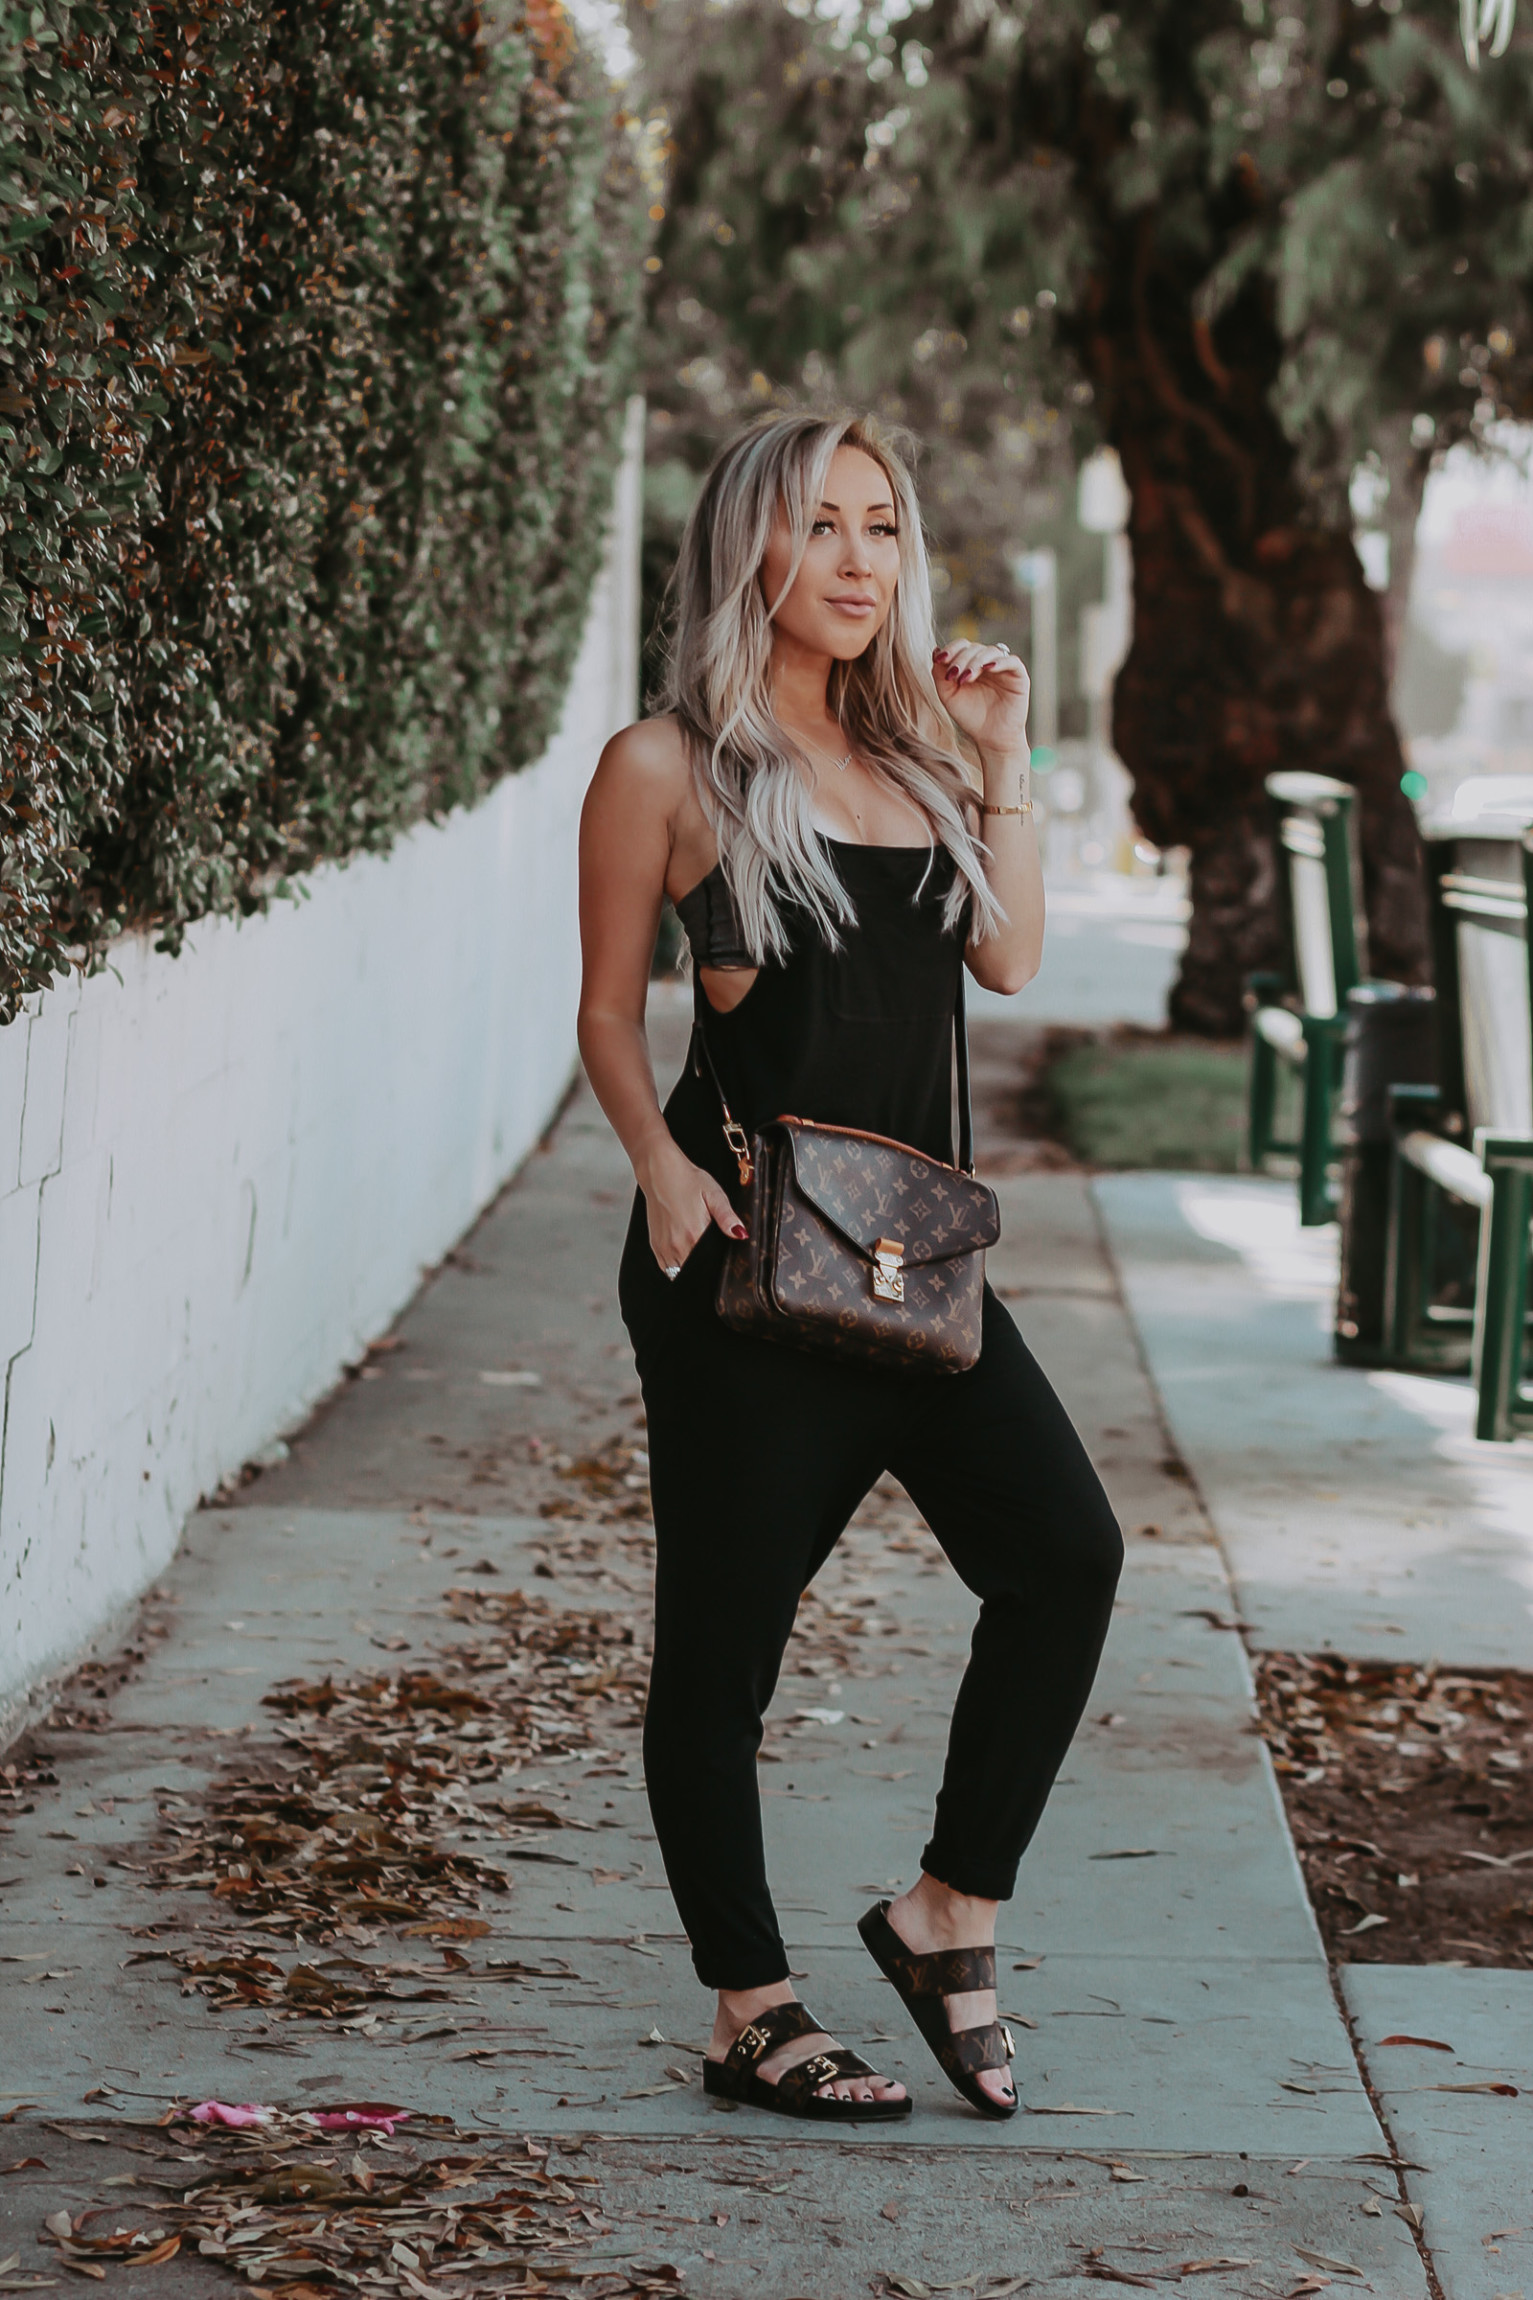 The Comfiest & Cutest Overalls, EVER | Louis Vuitton Pochette Metis | Louis Vuitton Shoes | Louis Vuitton Sandals | Blondie in the City by Hayley Larue